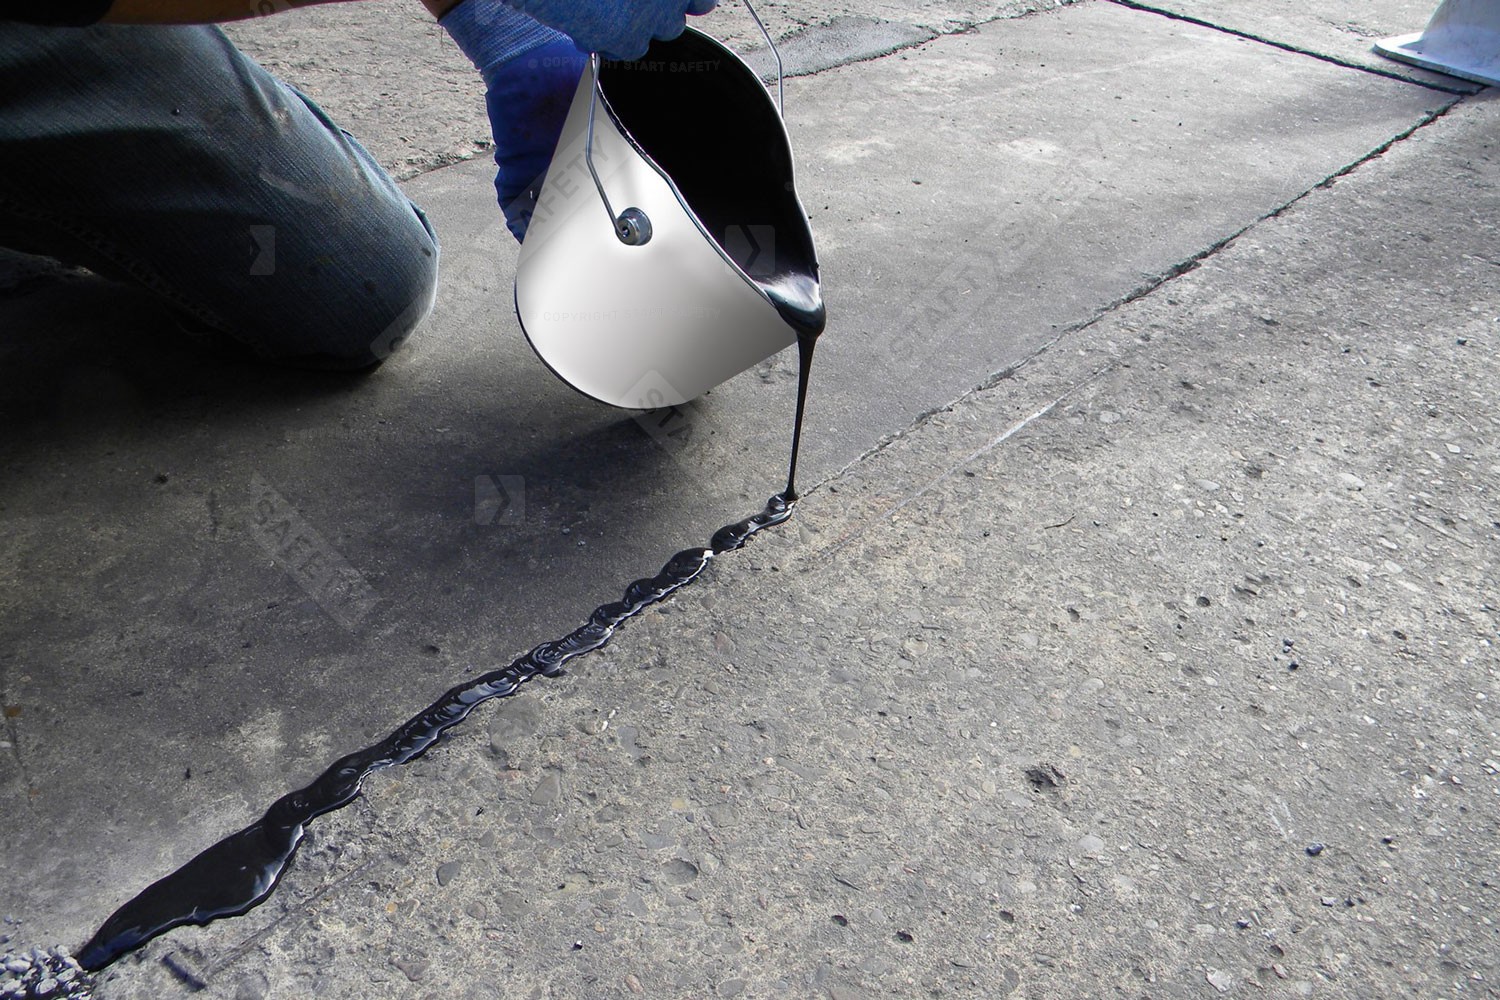 Restore Crack Repair Being Poured Into Small Crack On Concrete